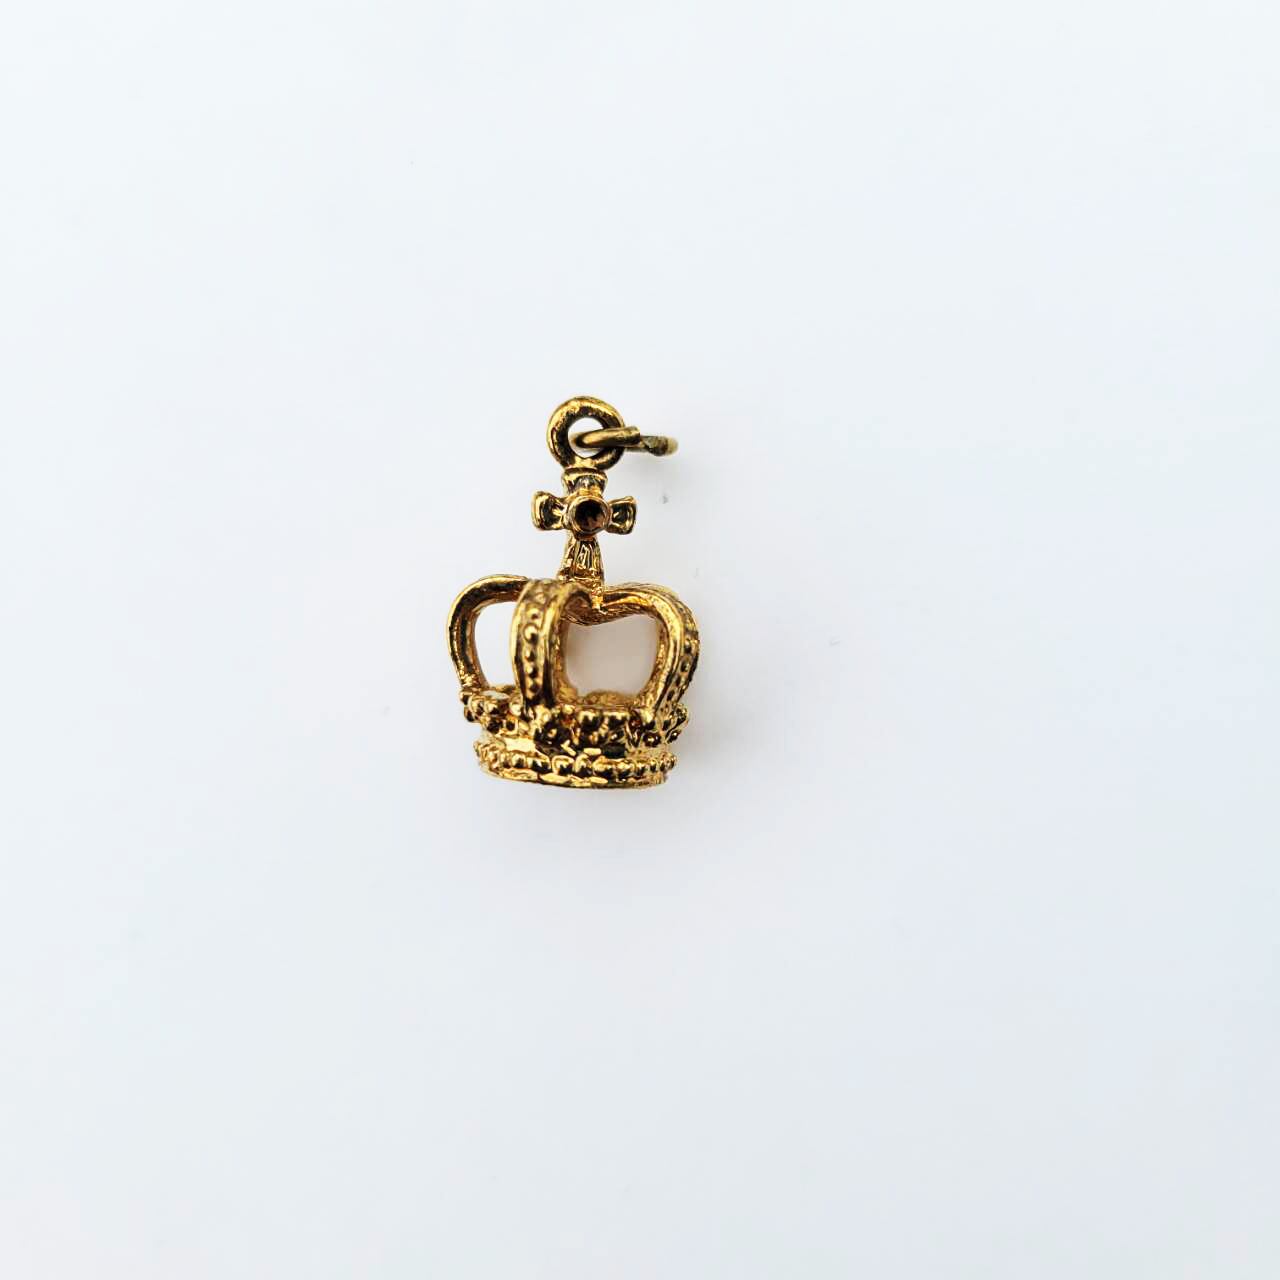 23K GOLD PLATED 925 SILVER CROWN PENDANT / FACE